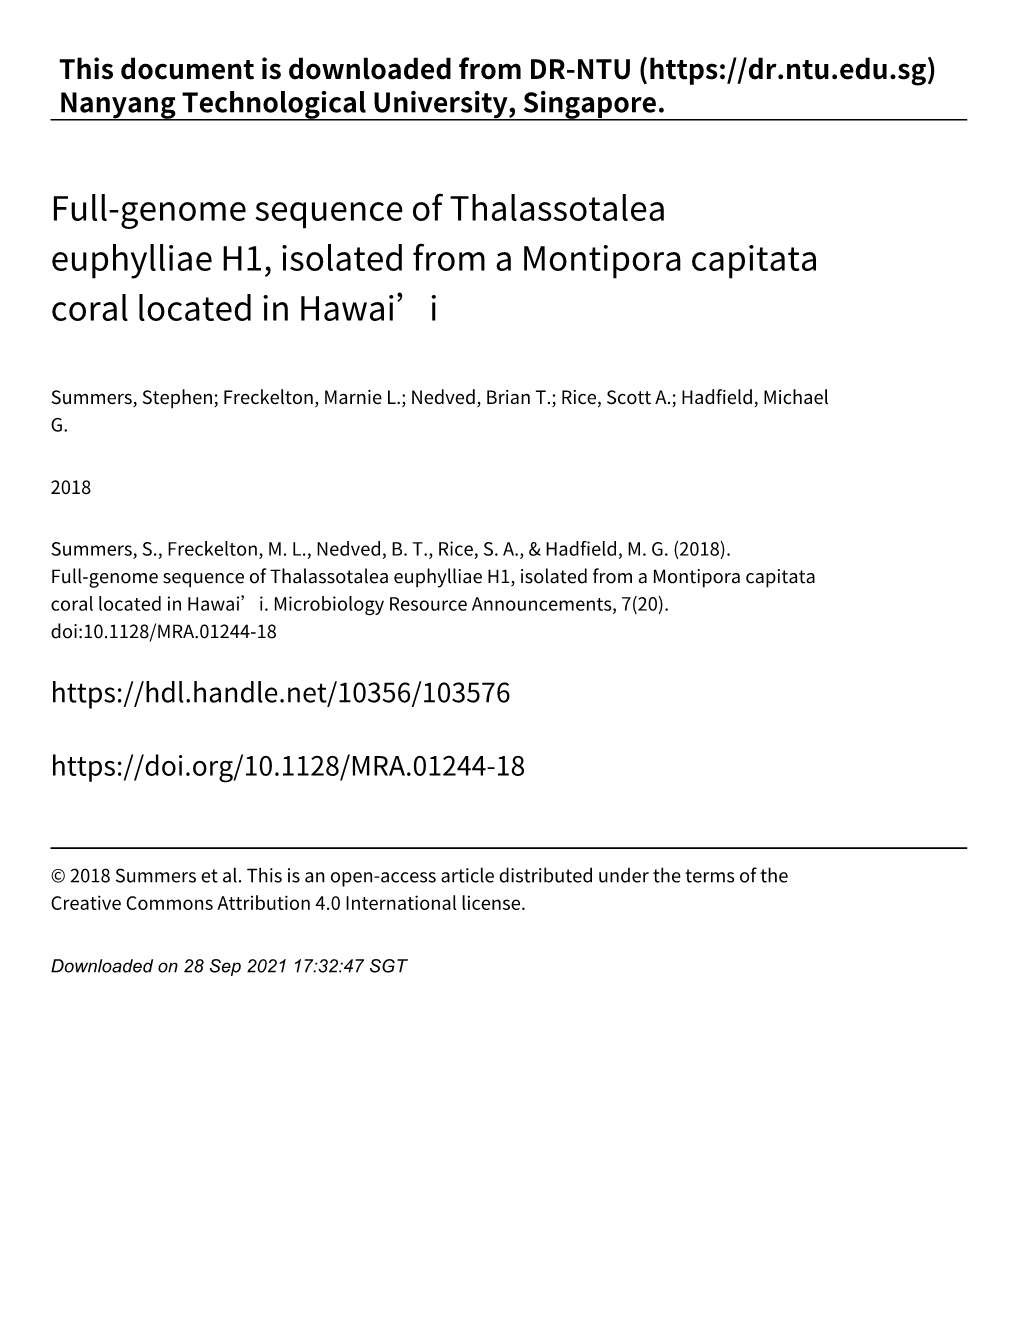 Full‑Genome Sequence of Thalassotalea Euphylliae H1, Isolated from a Montipora Capitata Coral Located in Hawai’I